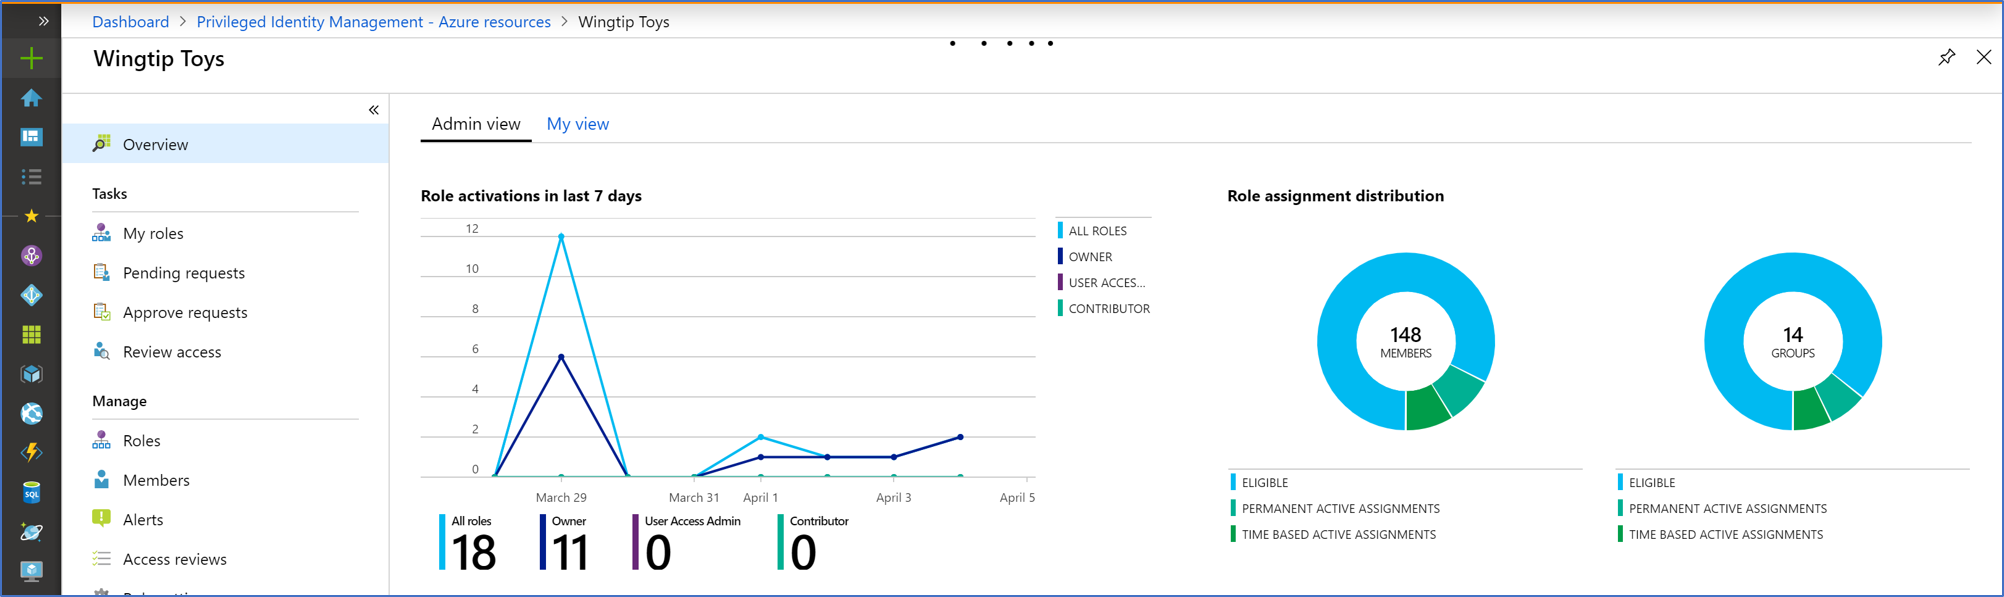 Screenshot of the Admin View dashboard, showing graphs and charts